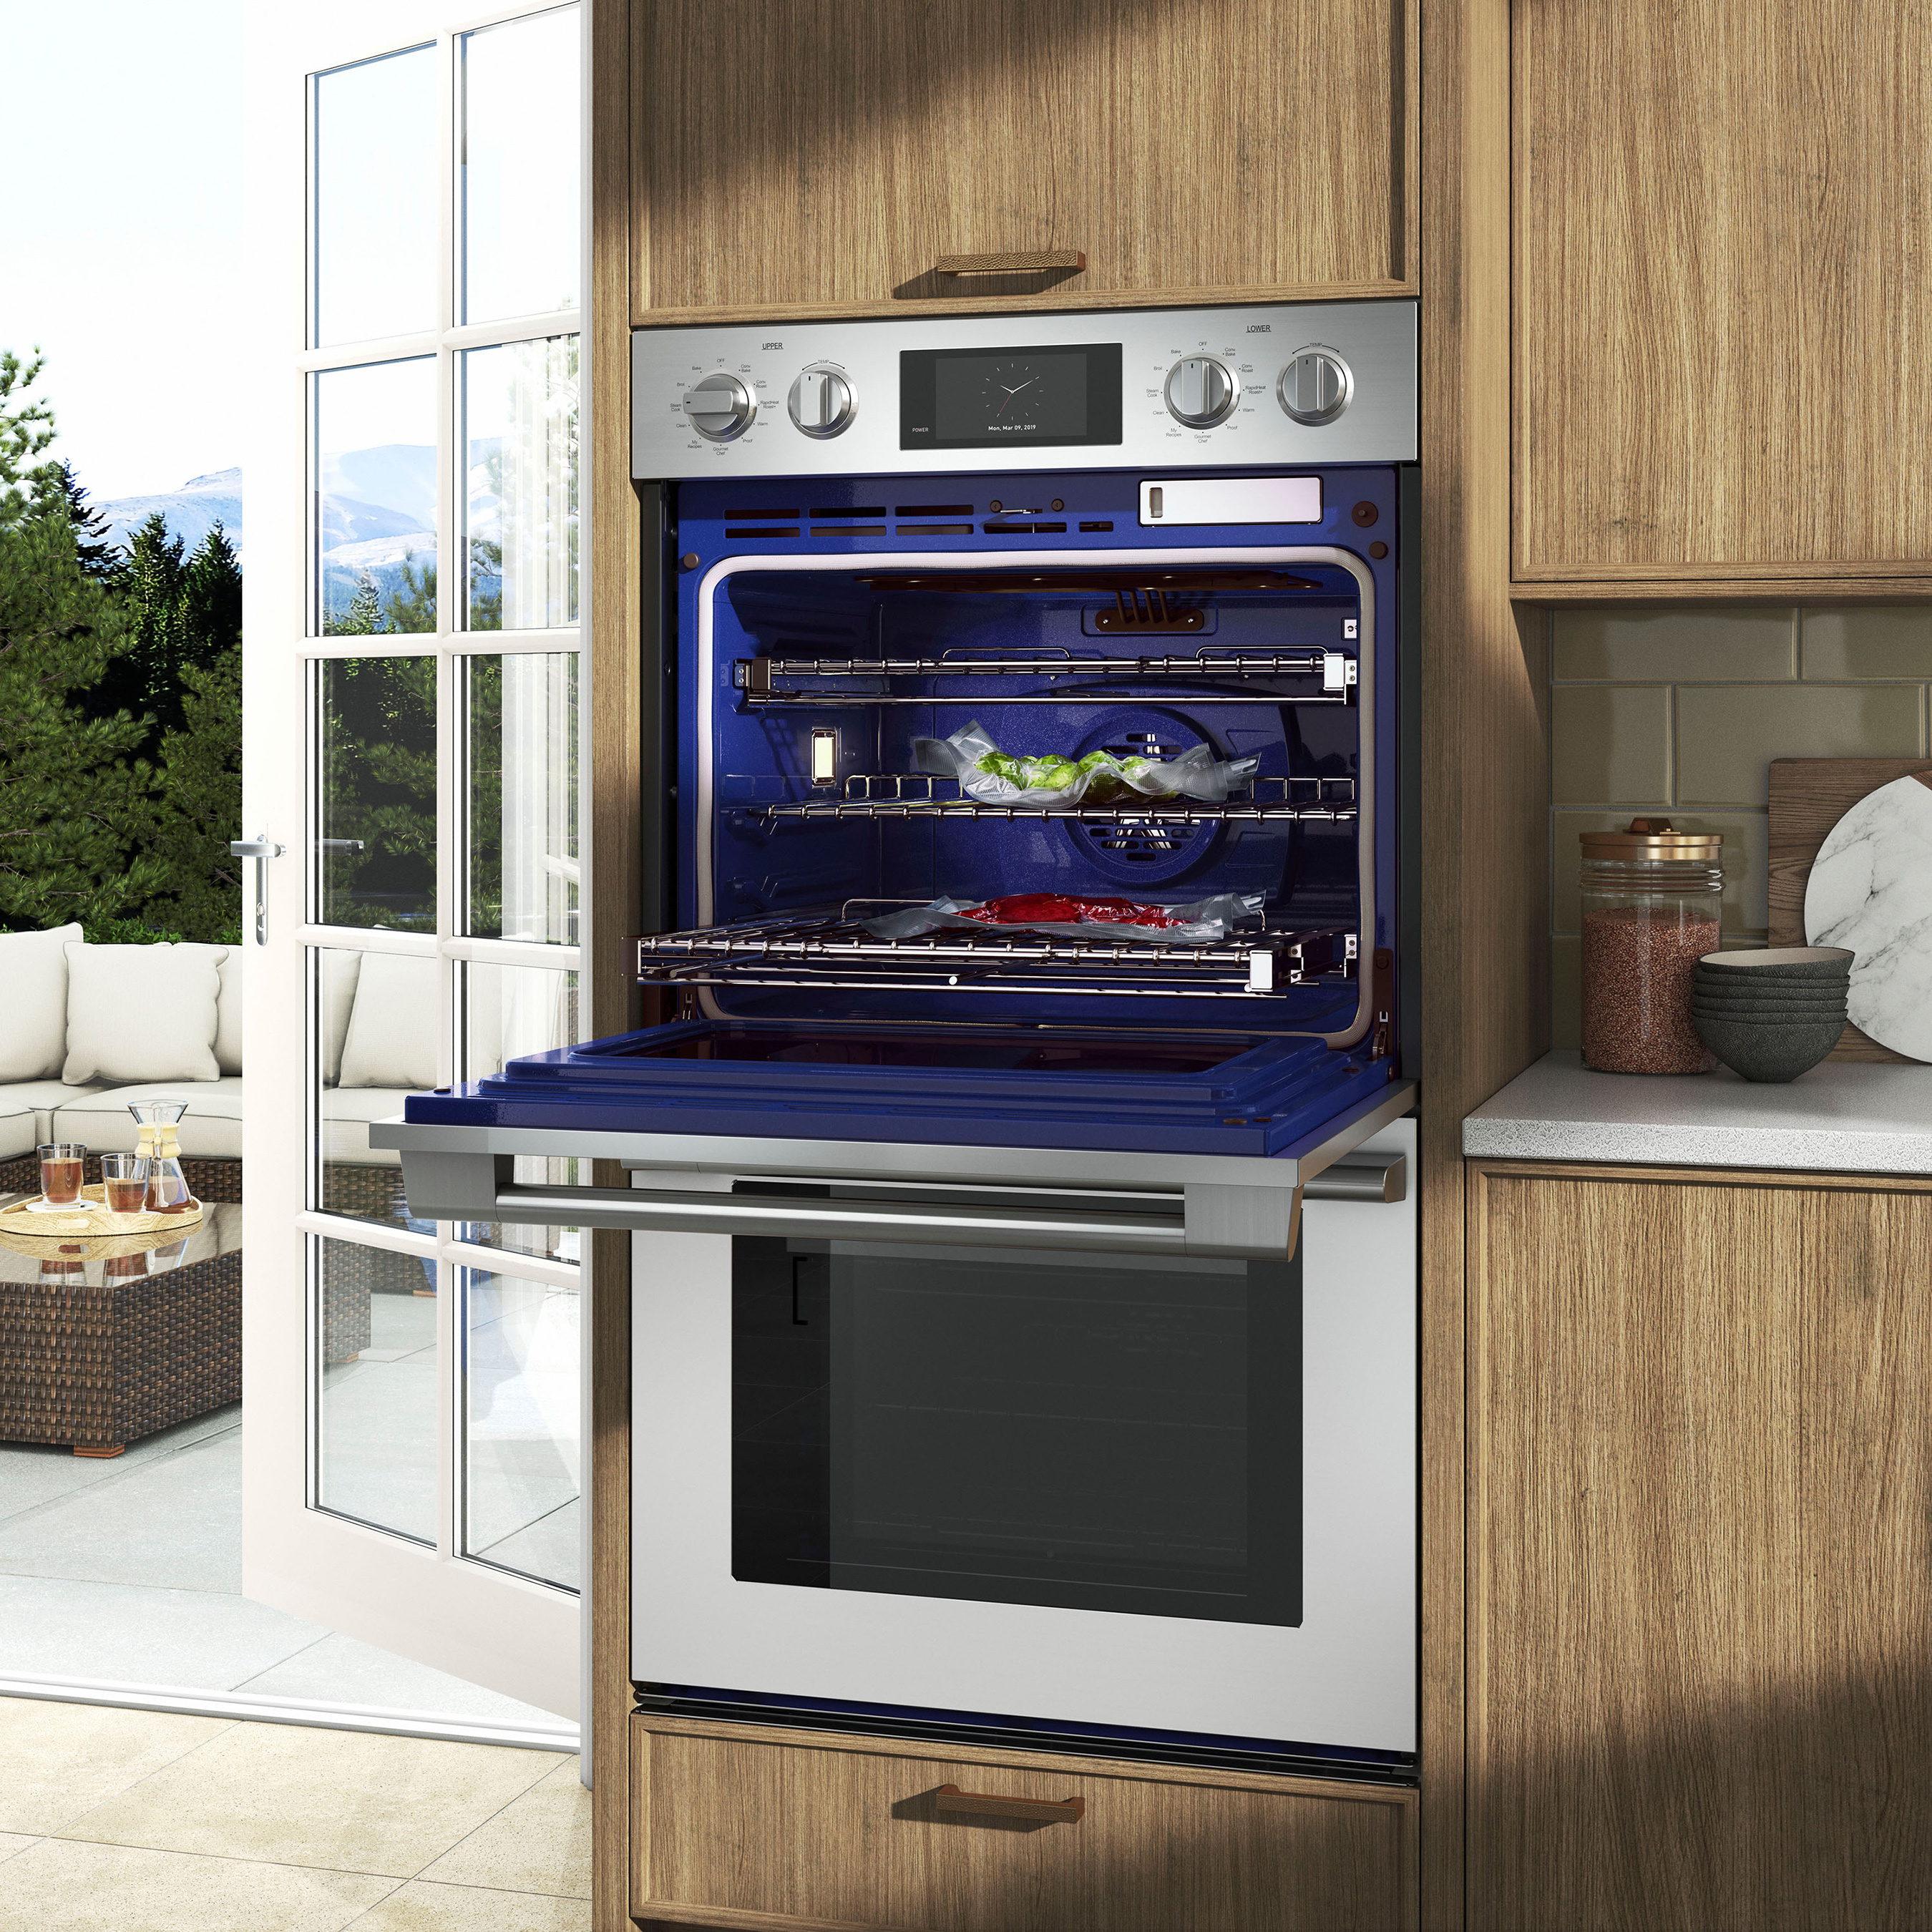 Signature Kitchen Suite’s recently launched double wall oven utilizes a steam sous vide cooking mode, allowing users to enjoy sous vide results right in the oven without the need for preheating.